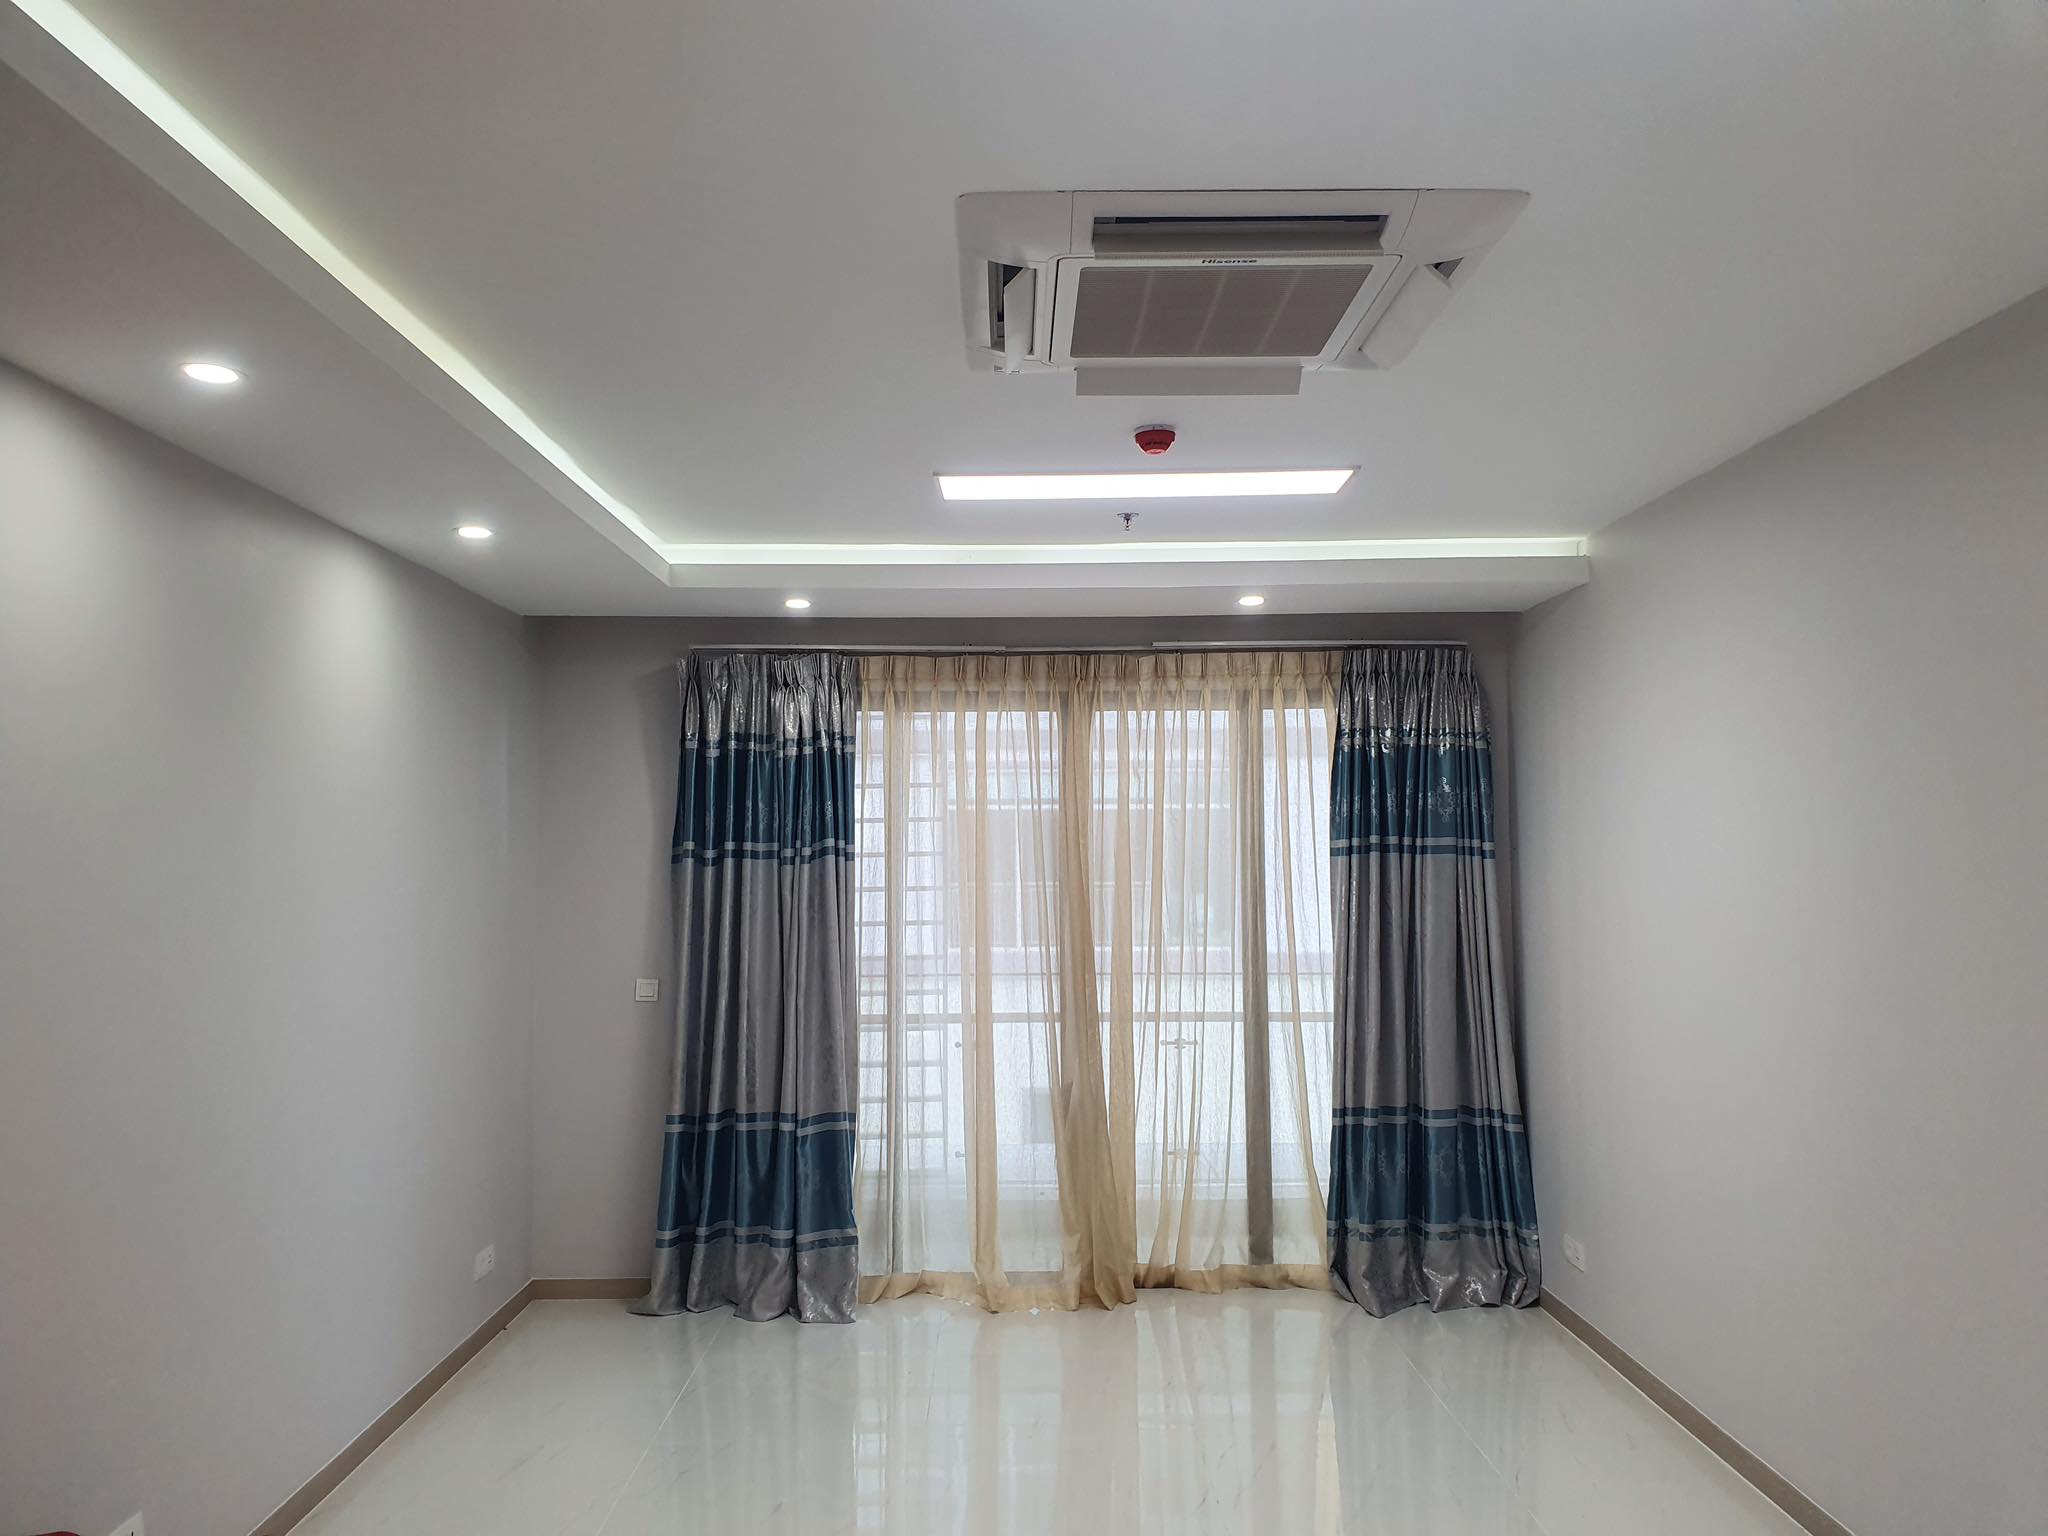 45m2 SOHO for rent, located in central of Phnom Penh, at C7 Olympia City!